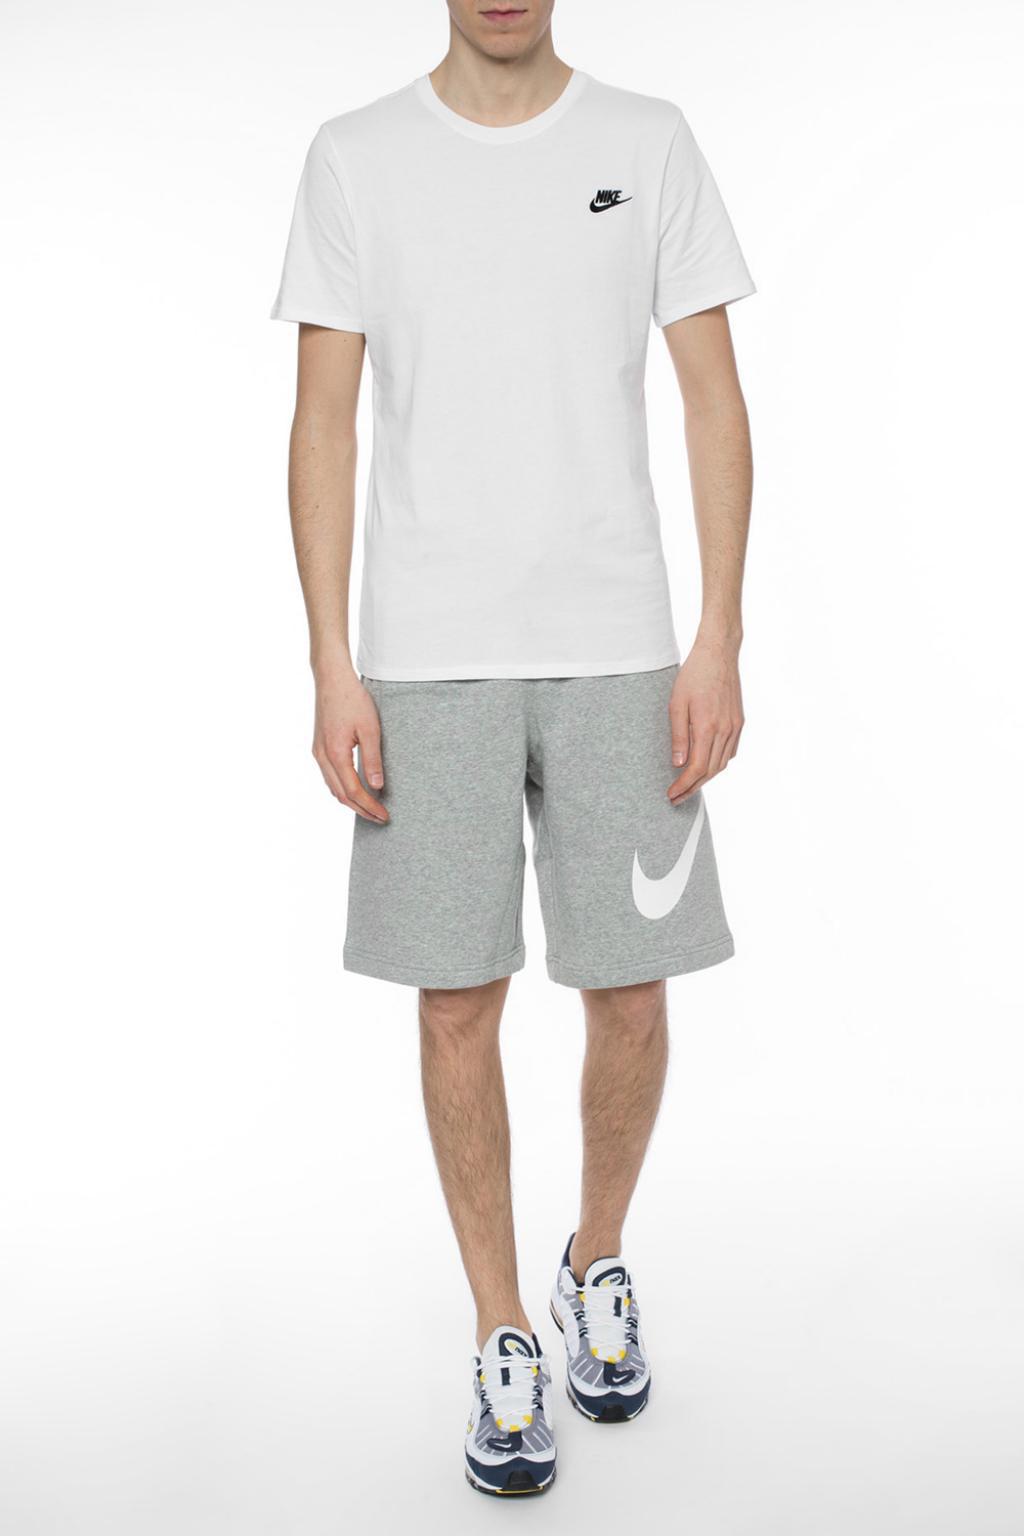 Nike Cotton Sweat Shorts in Grey (Gray) for Men - Lyst